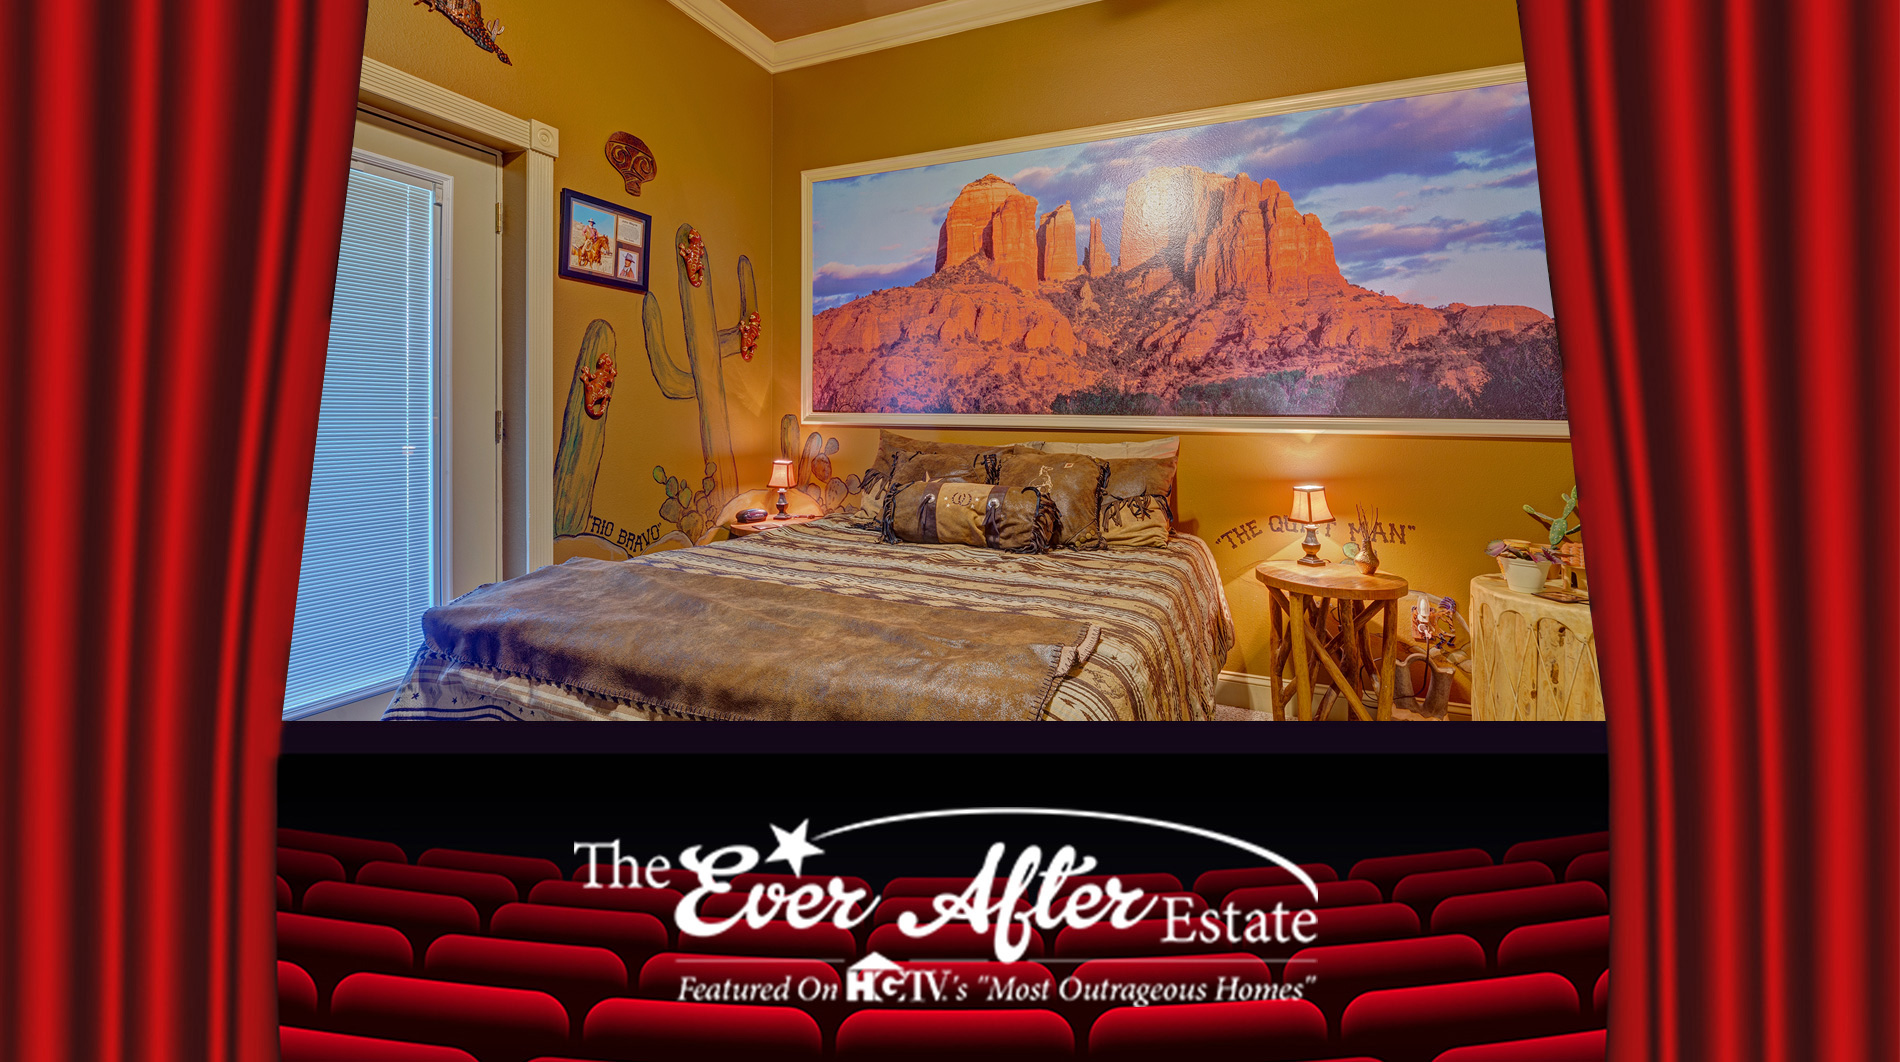 check out the john wayne bedroom at Ever After Estate near Orlando and Disney World